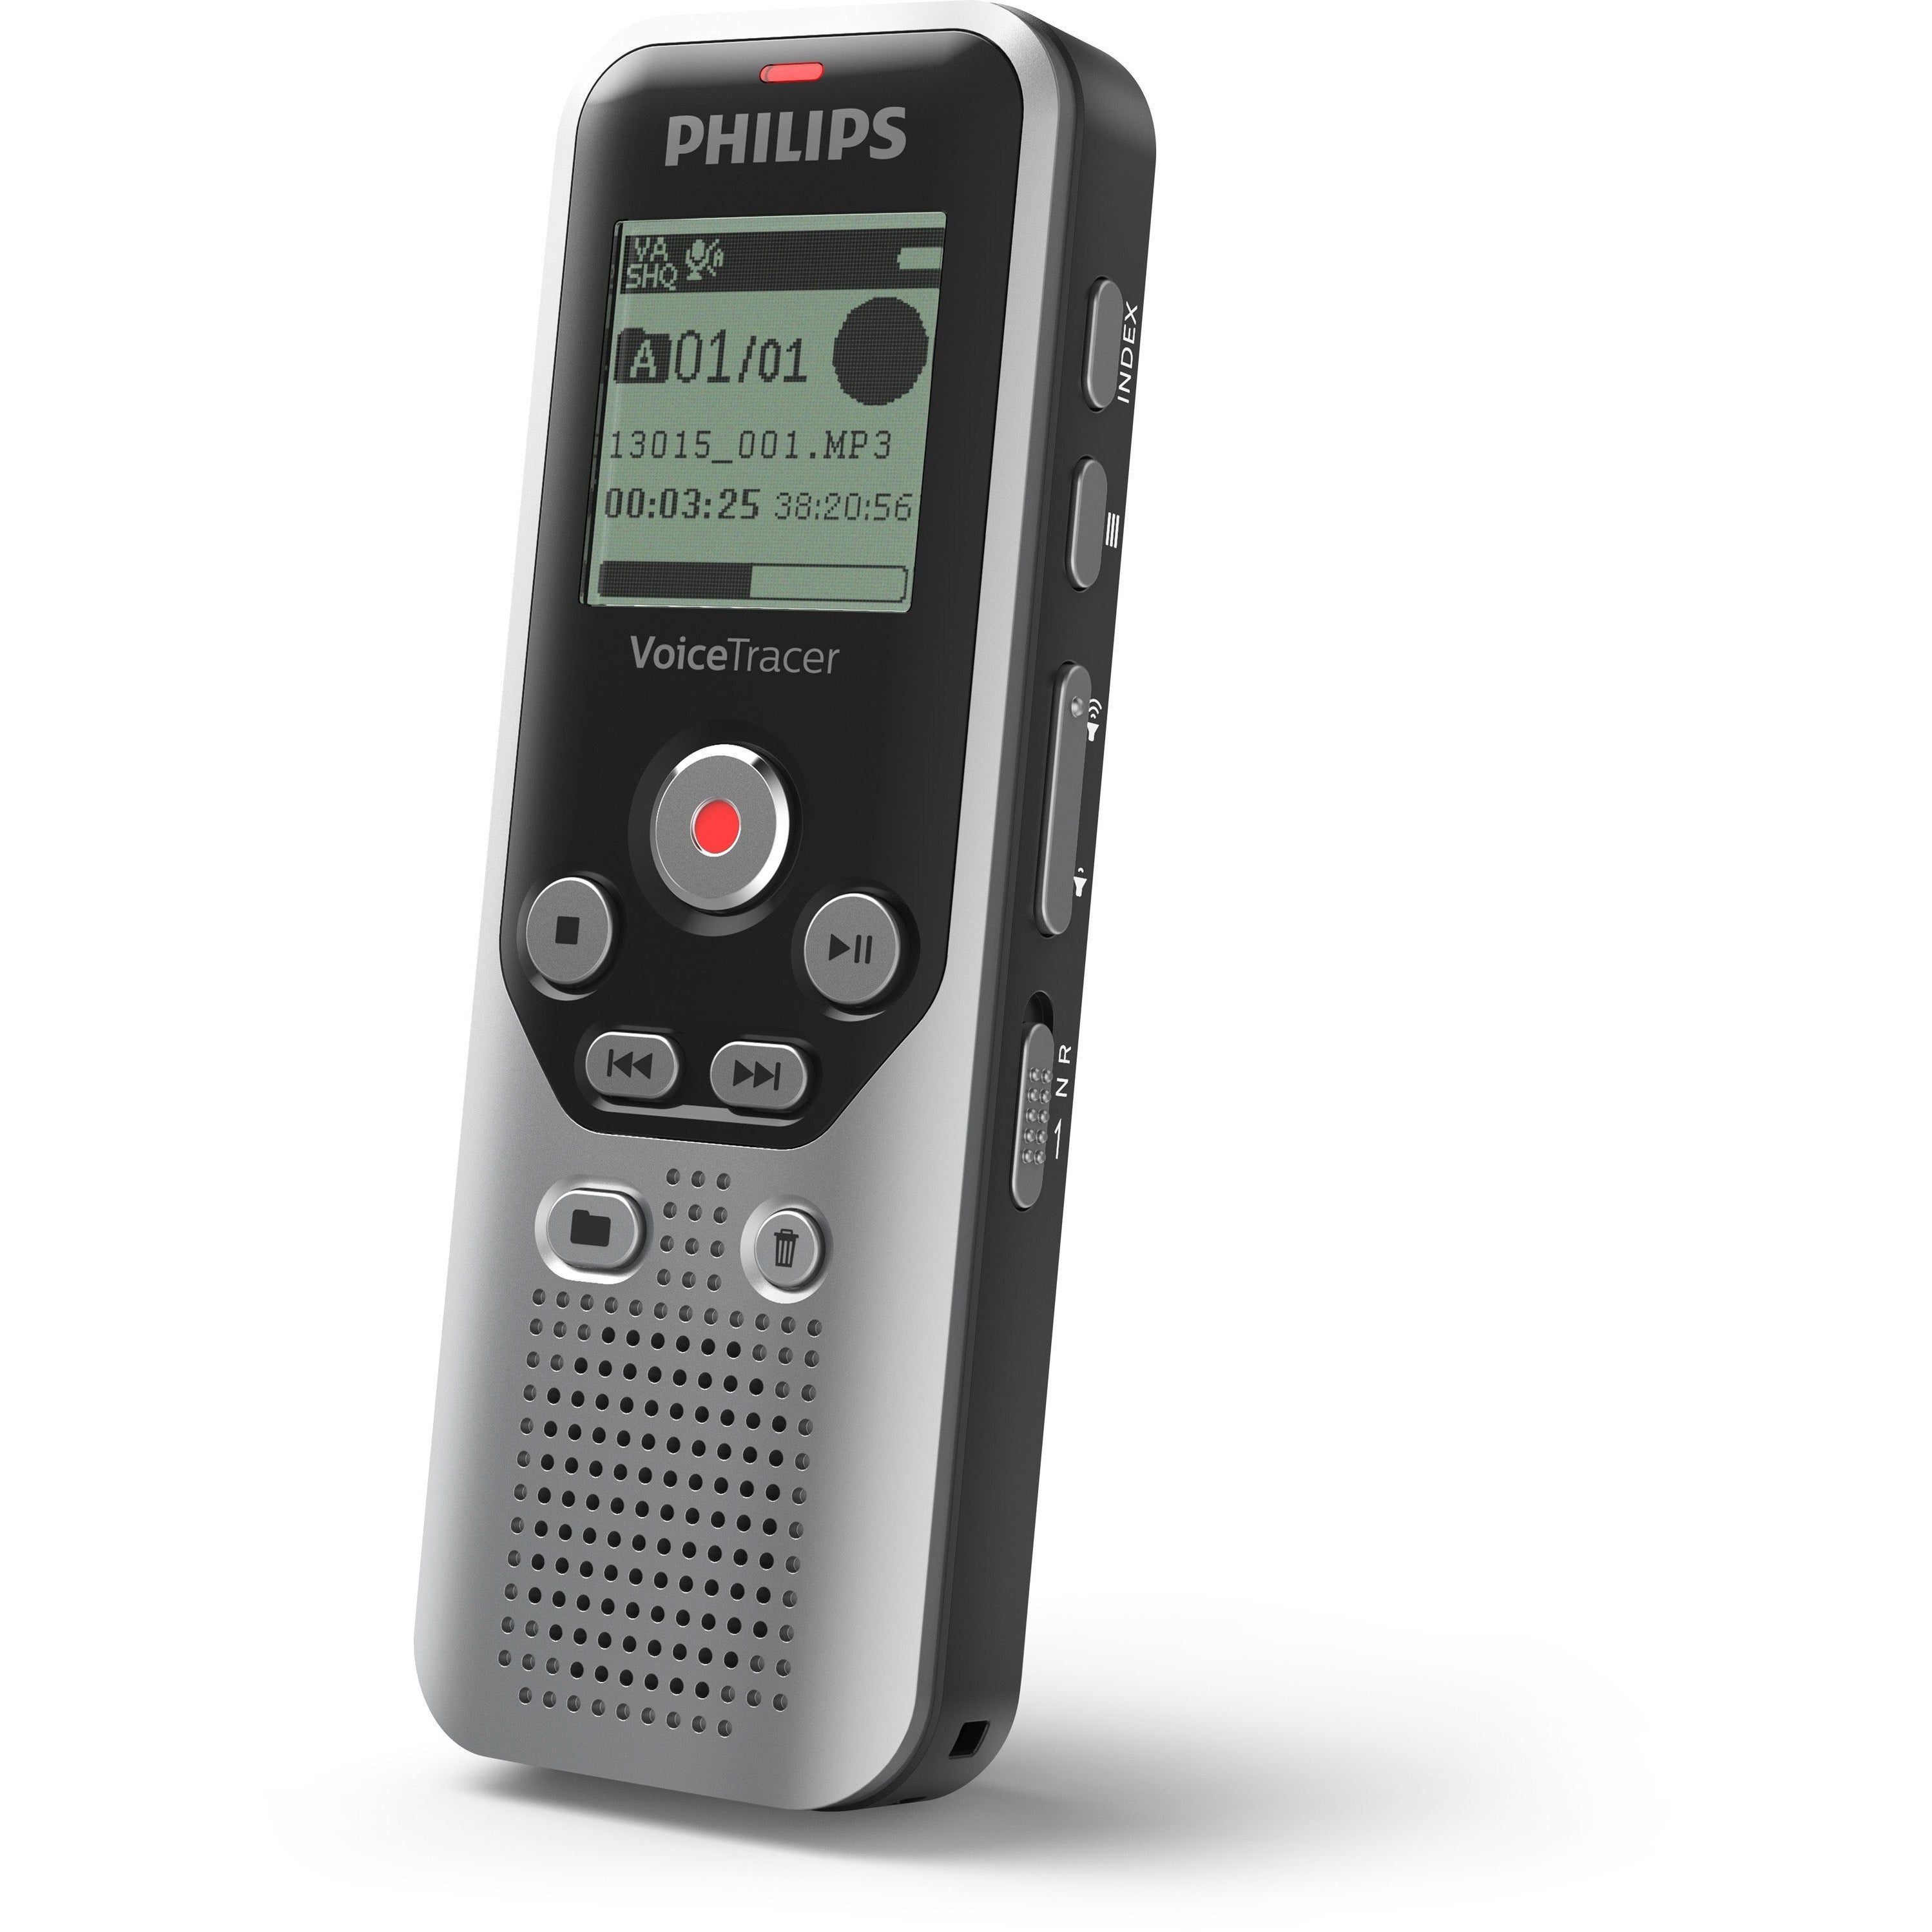 philips-voice-tracer-audio-recorder-dvt1250-8-gbmicrosd-sd-supported-13-lcd-wav-headphone-583-hourspeacerecording-time-portable_pspdvt1250 - 3